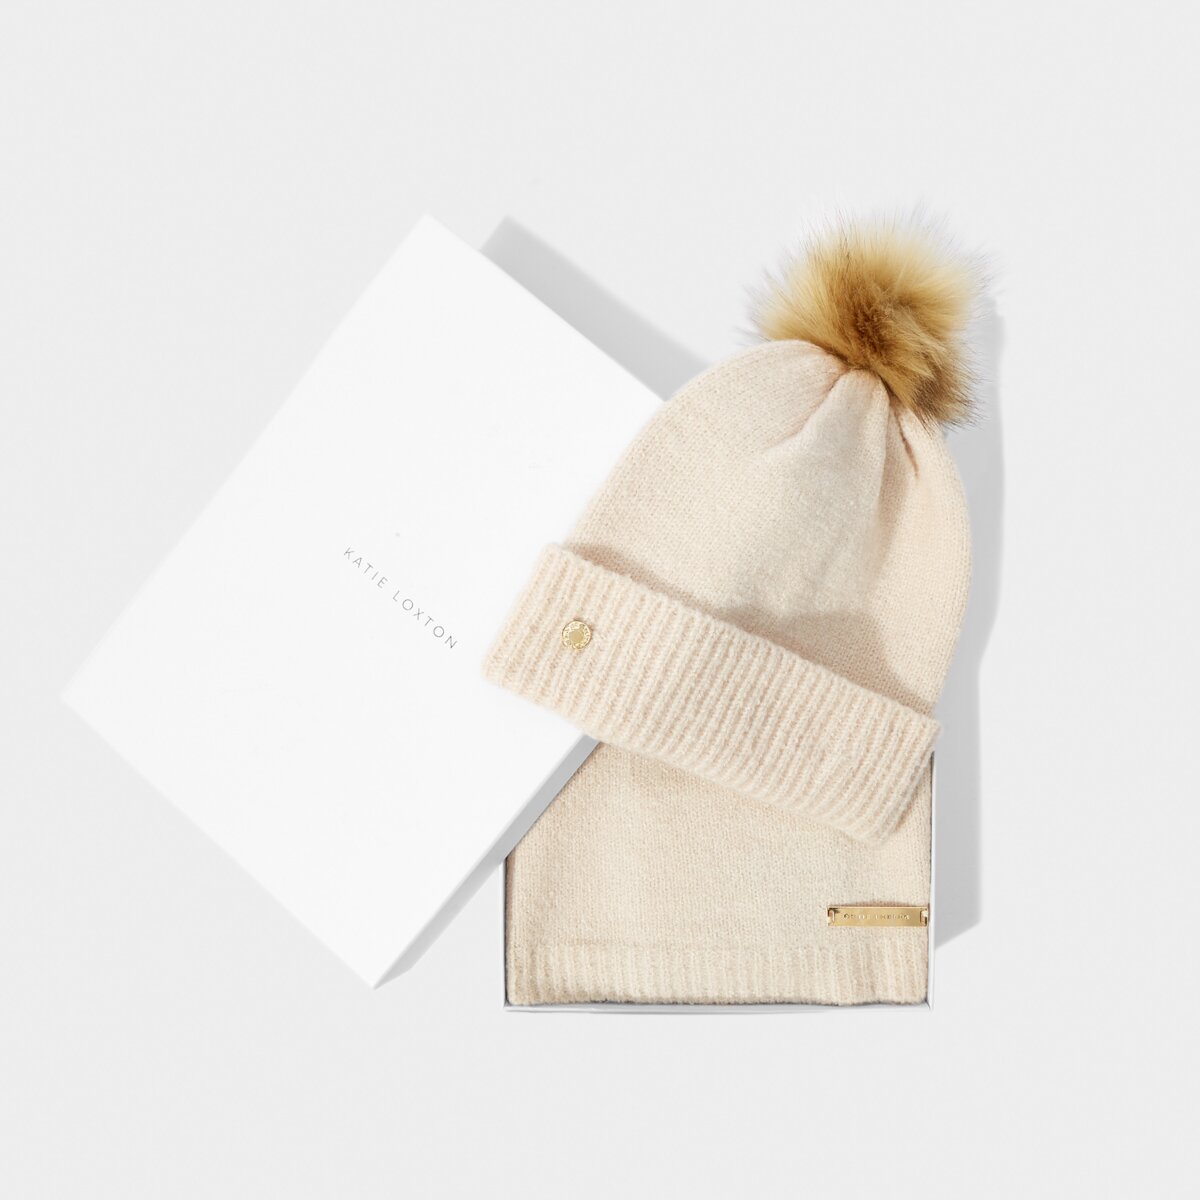 Showing the Knitted Hat and Scarf Set in Eggshell color with the white box that come in it, great for gifting.